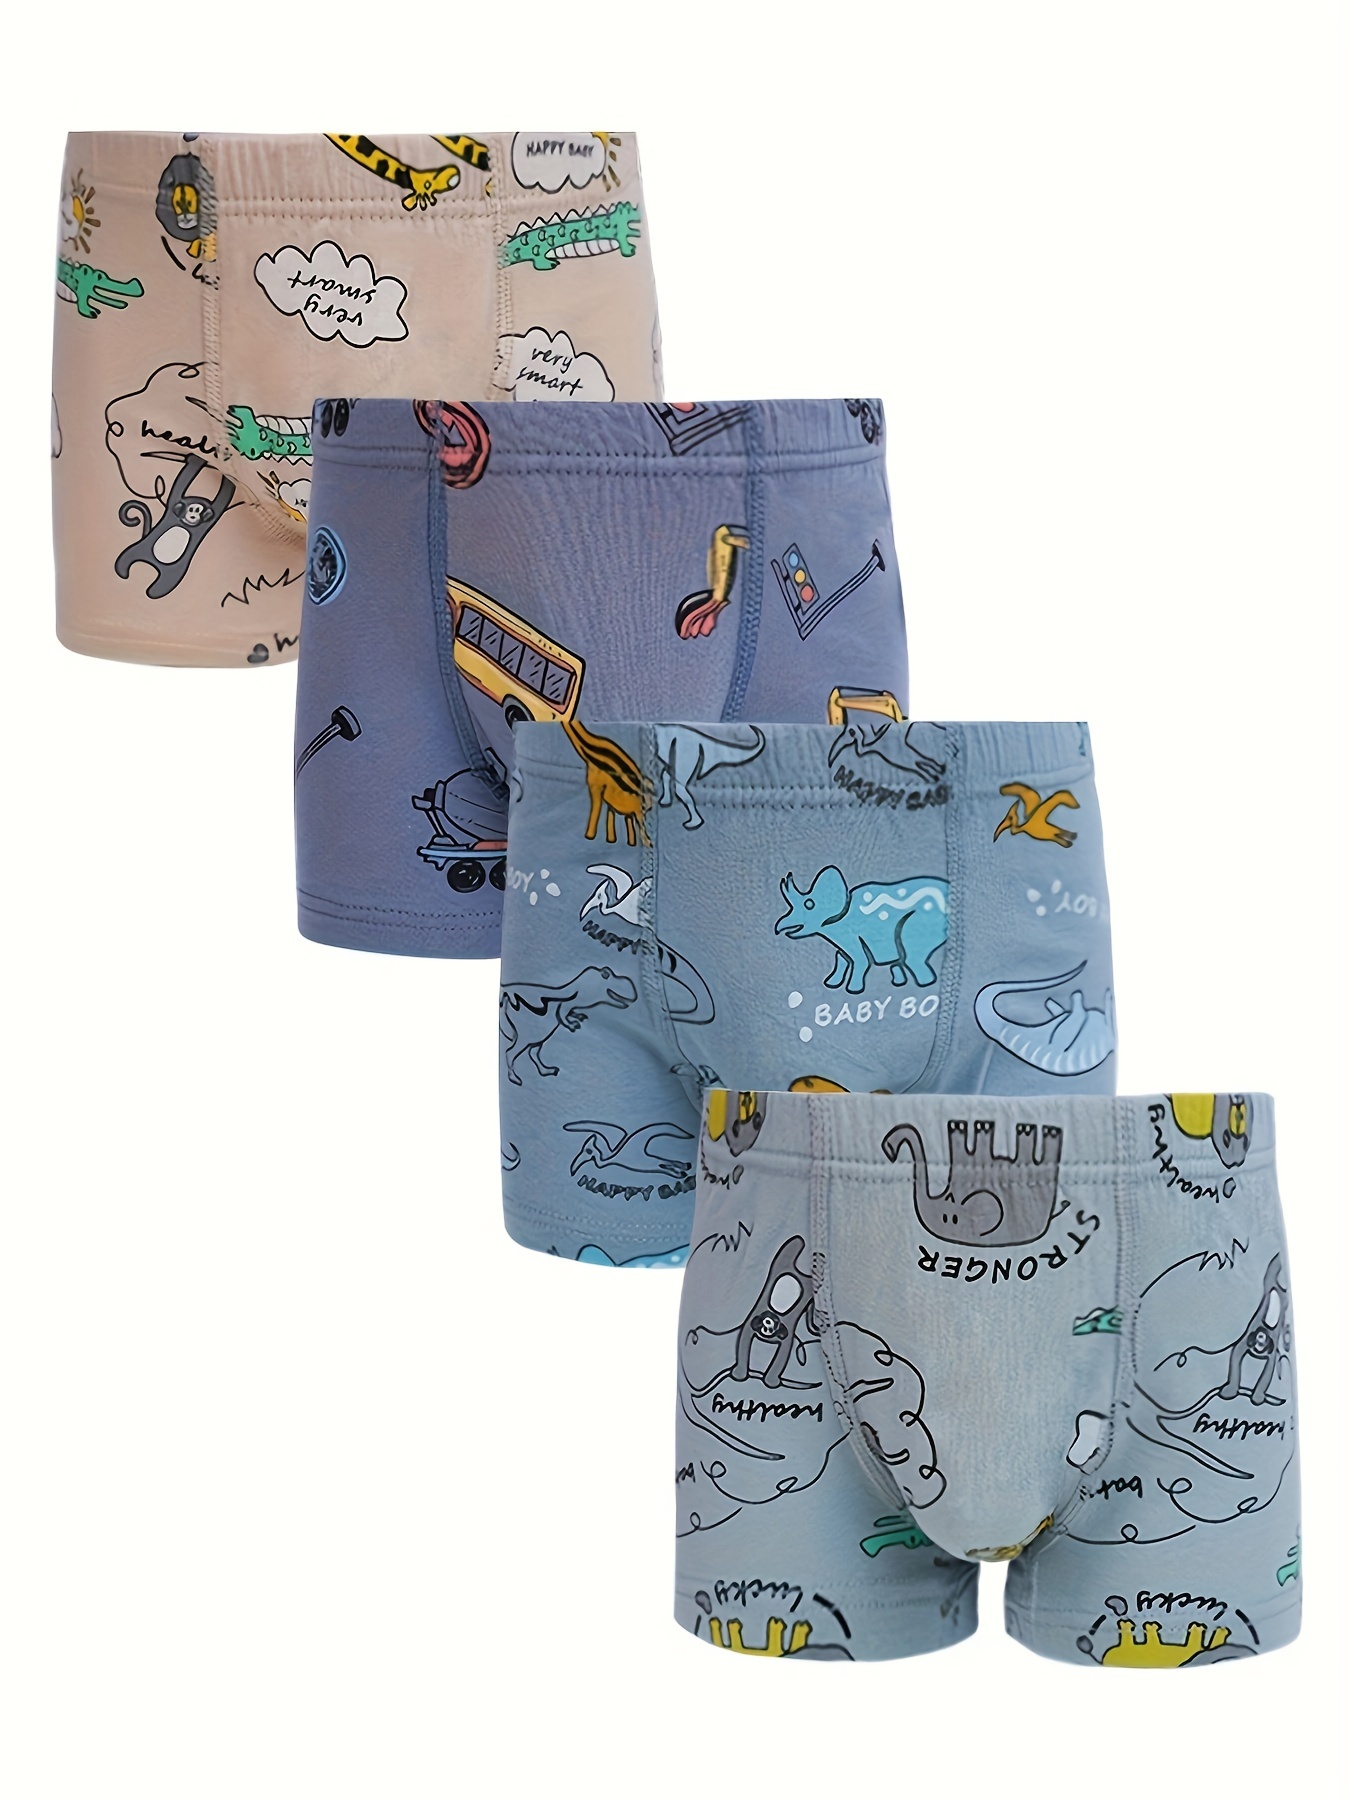 Teen Boys Boxer Briefs Cute Animal Pattern 95% Cotton Waist Elastic Boxer  Briefs Pack Of 4 For Under 12 Years